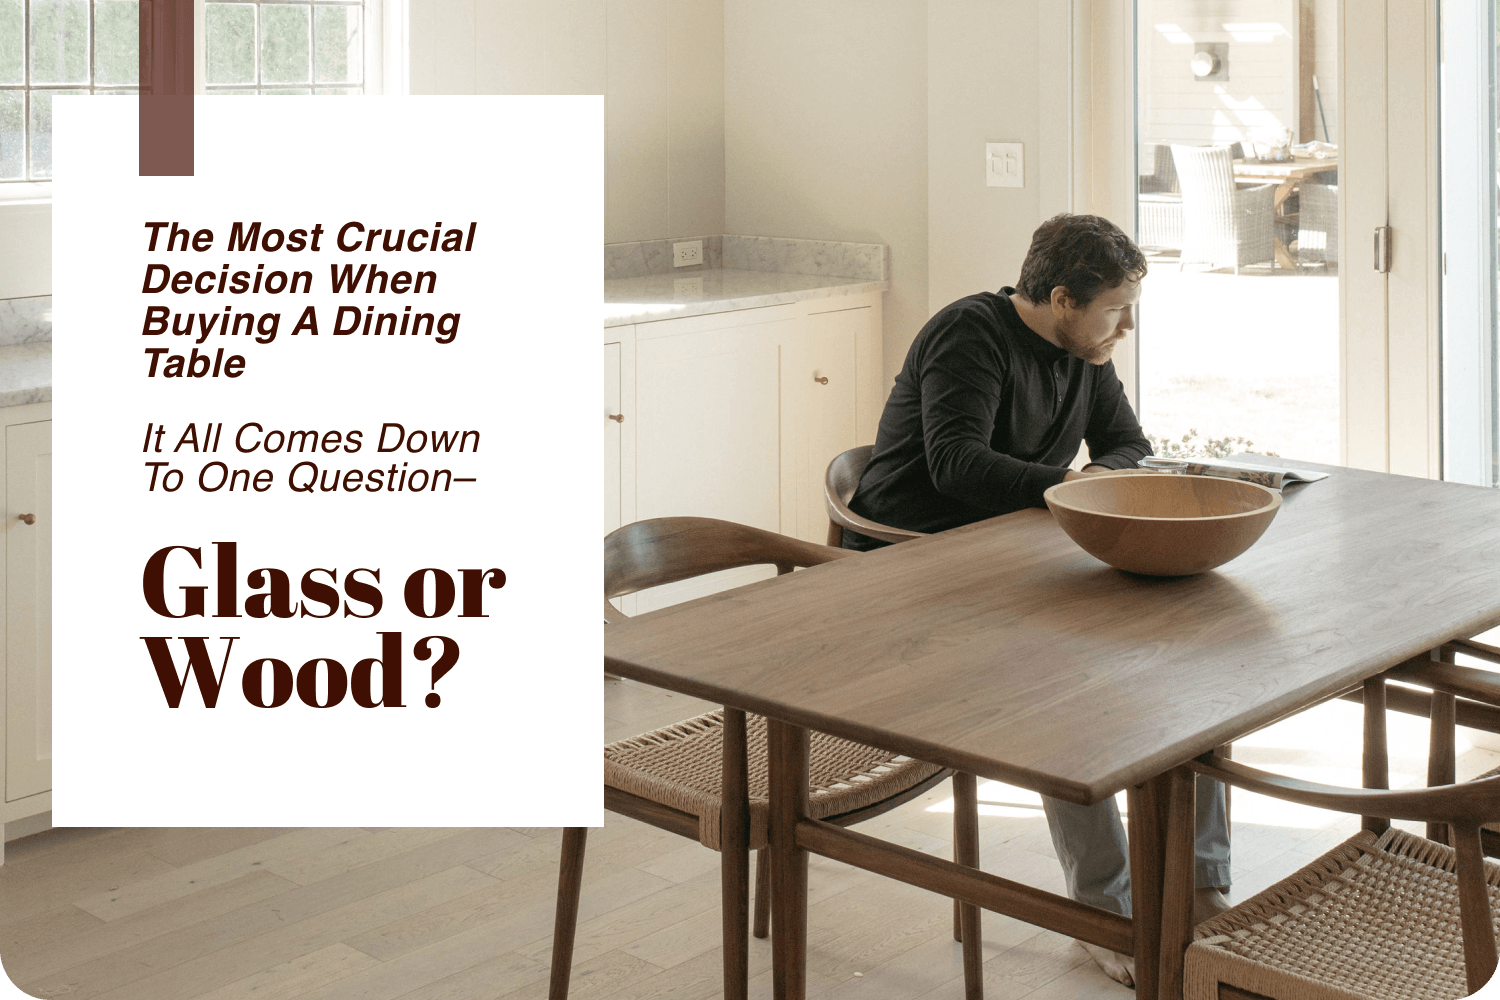 The Most Crucial Decision When Buying a Dining Table It all comes down to one question– glass or wood?